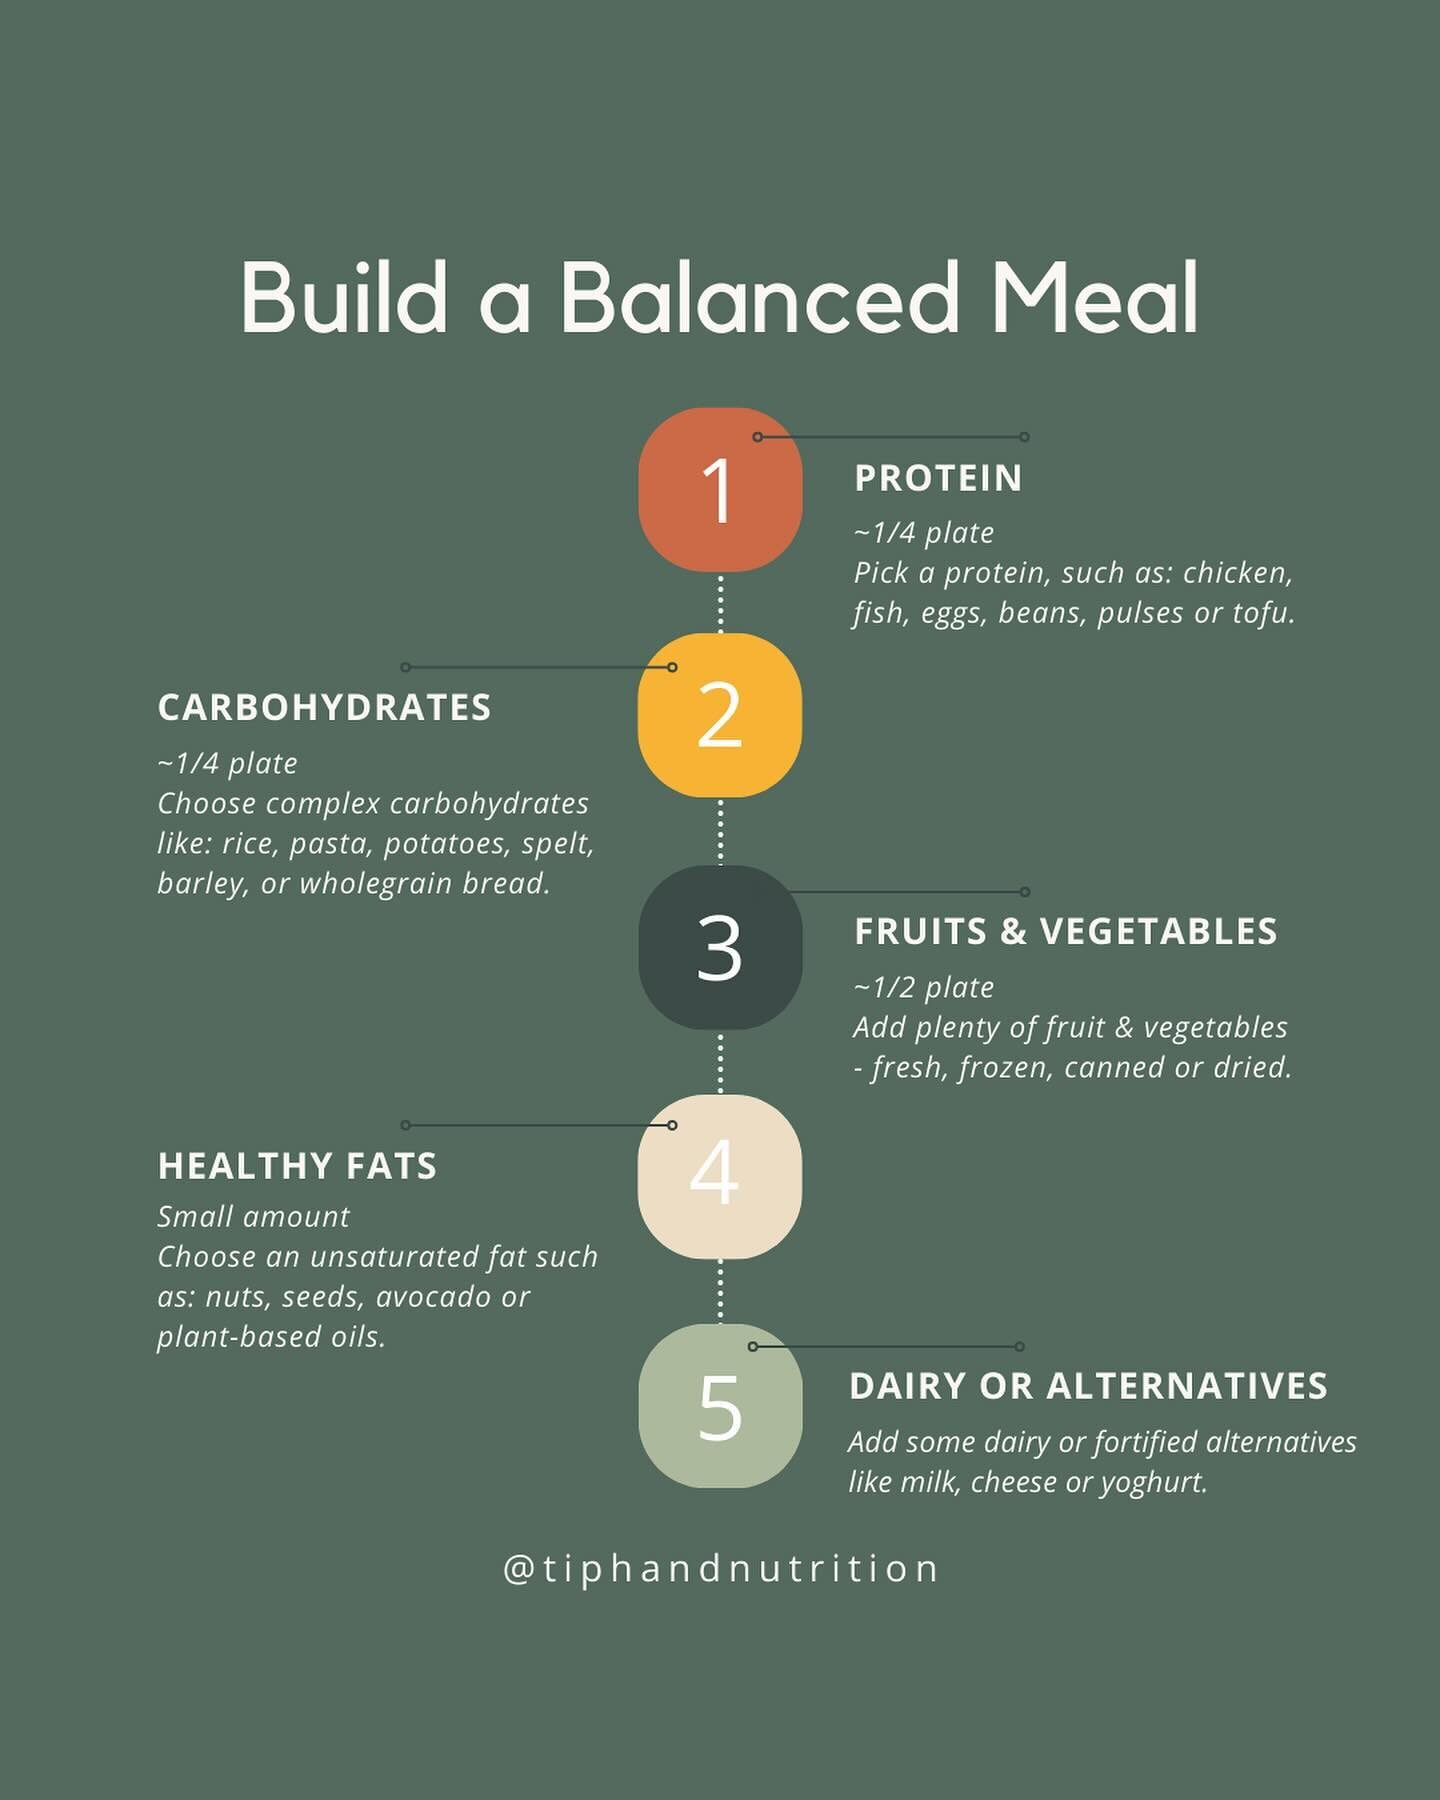 Build a balanced meal 🍽

It&rsquo;s so important we eat a wide variety of foods, but sometimes that can seem difficult to make sure we are nourishing our bodies in a balanced way!

So here are 5 simple tips to help you build balanced meals:

1️⃣ Sta